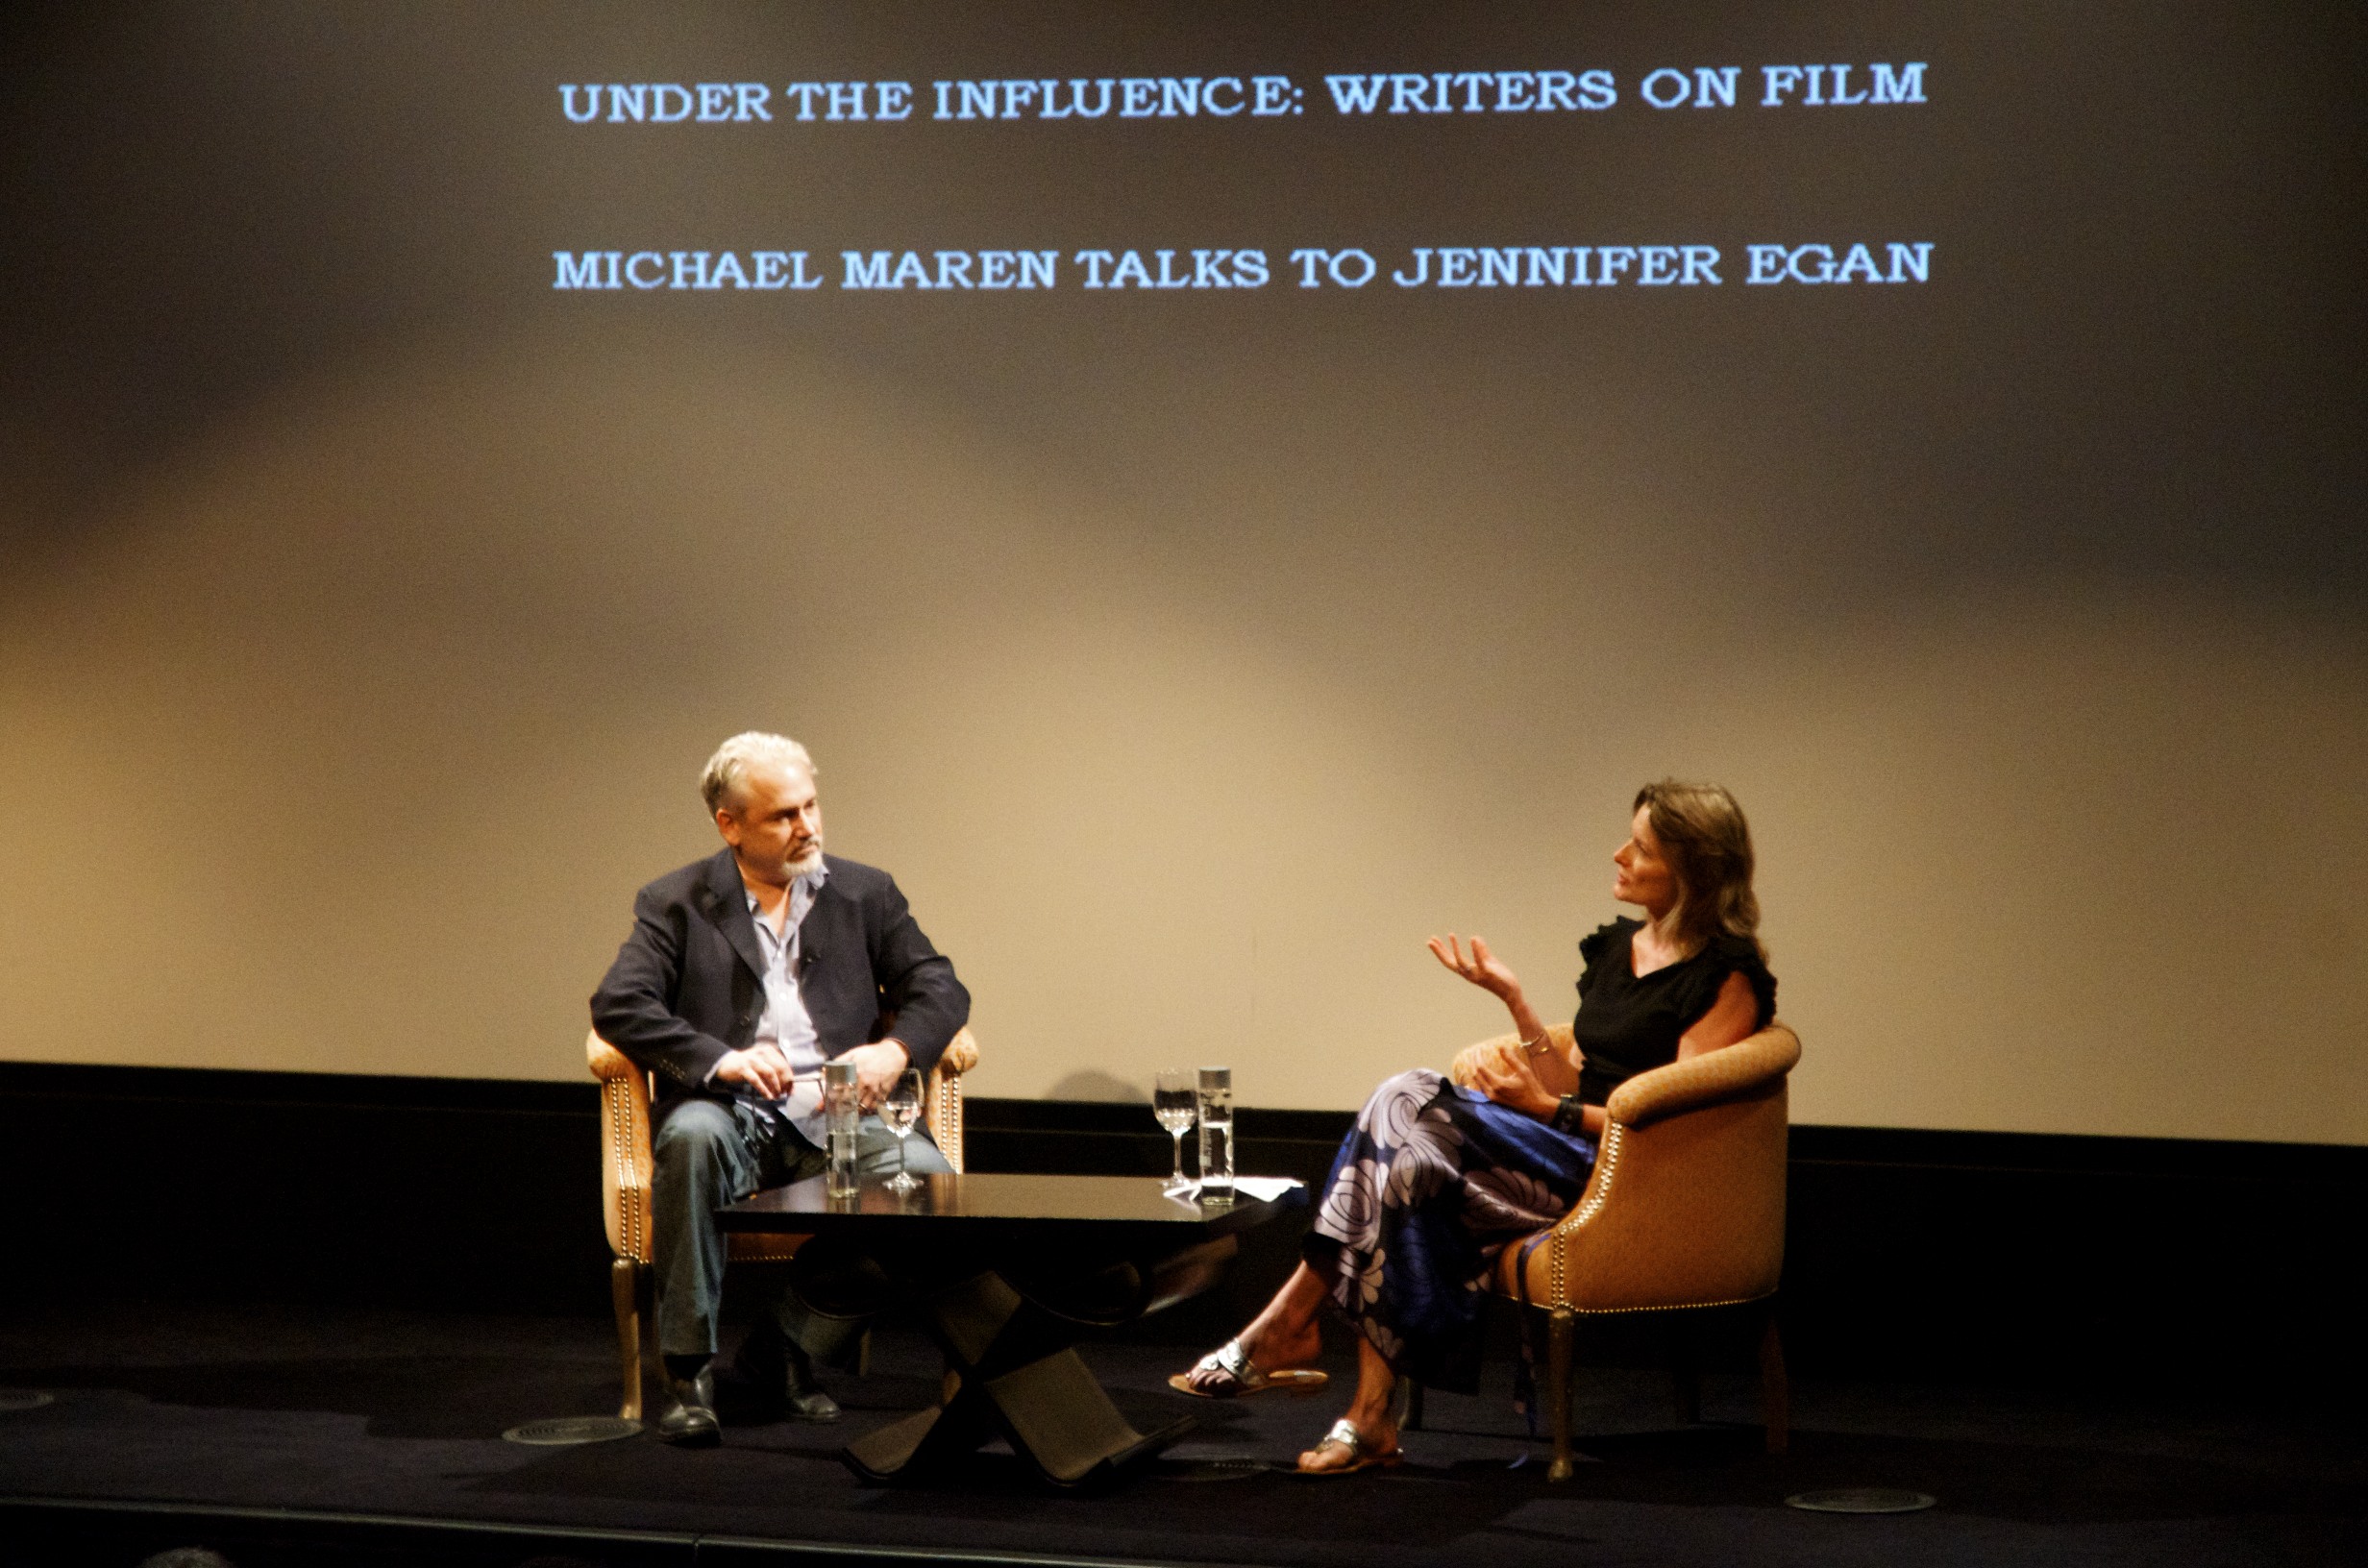 Discussing Pulp Fiction with Jennifer Egan